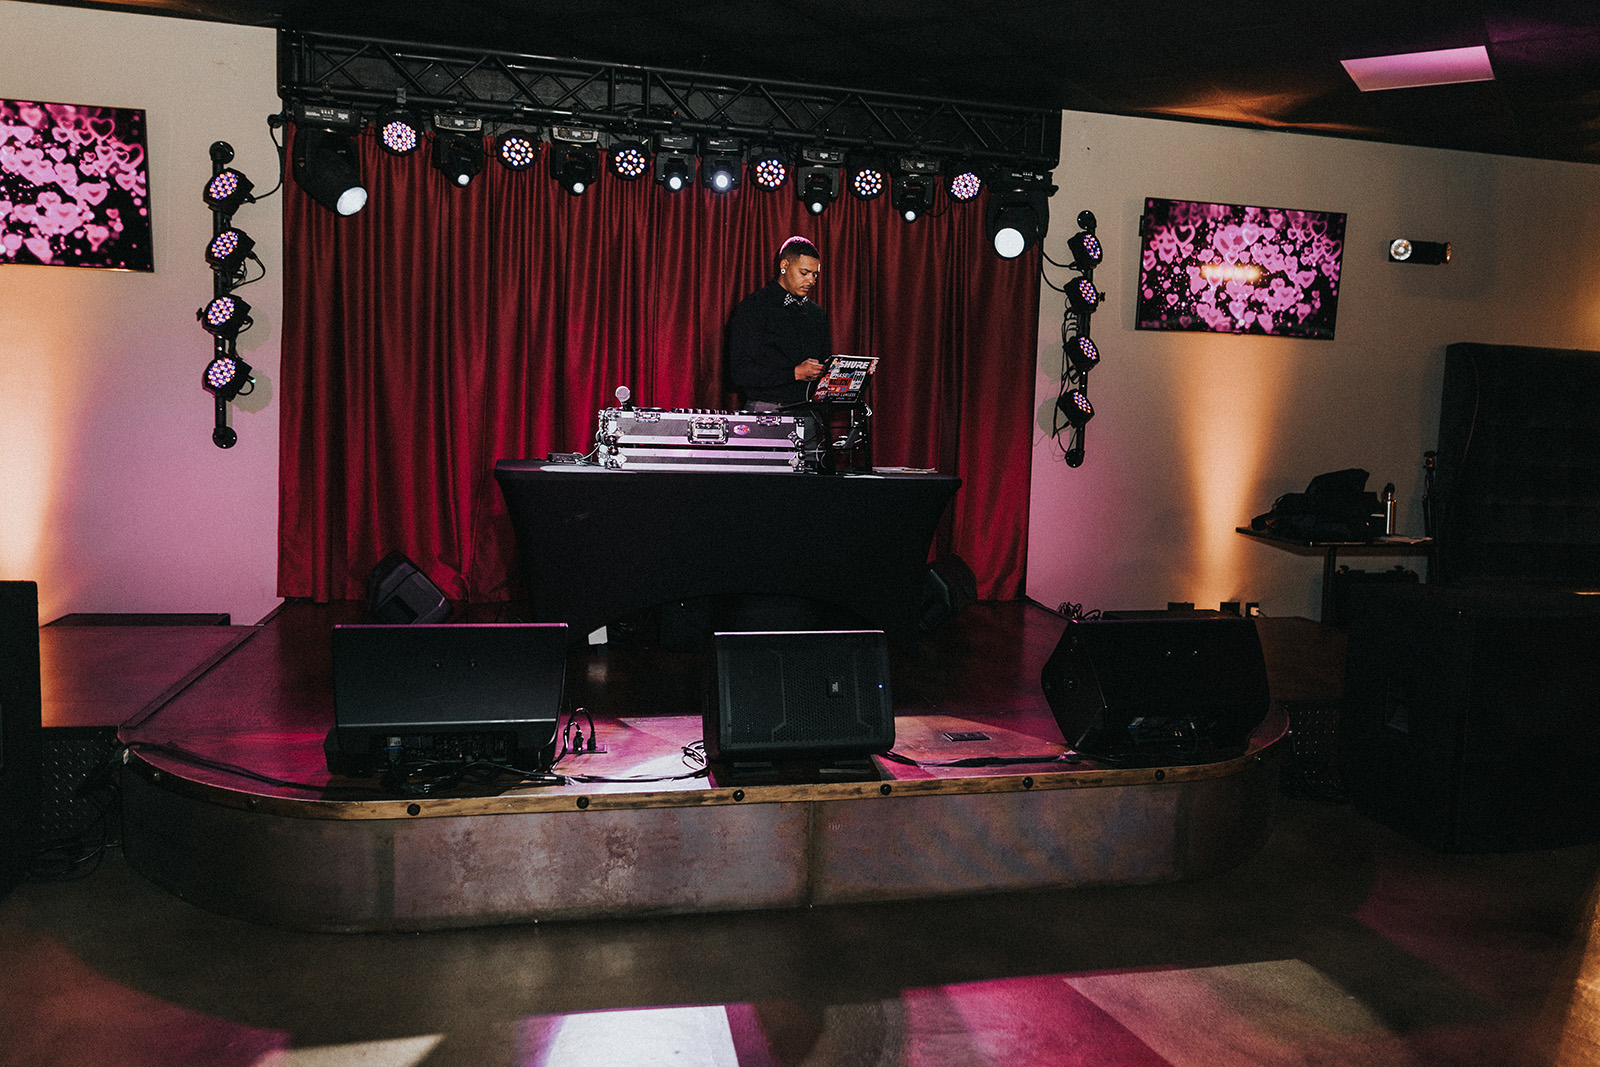 Ashley & Dan's wedding DJ at Rivet: Canteen & Assembly. Photography by Shiloh Leath Photography.